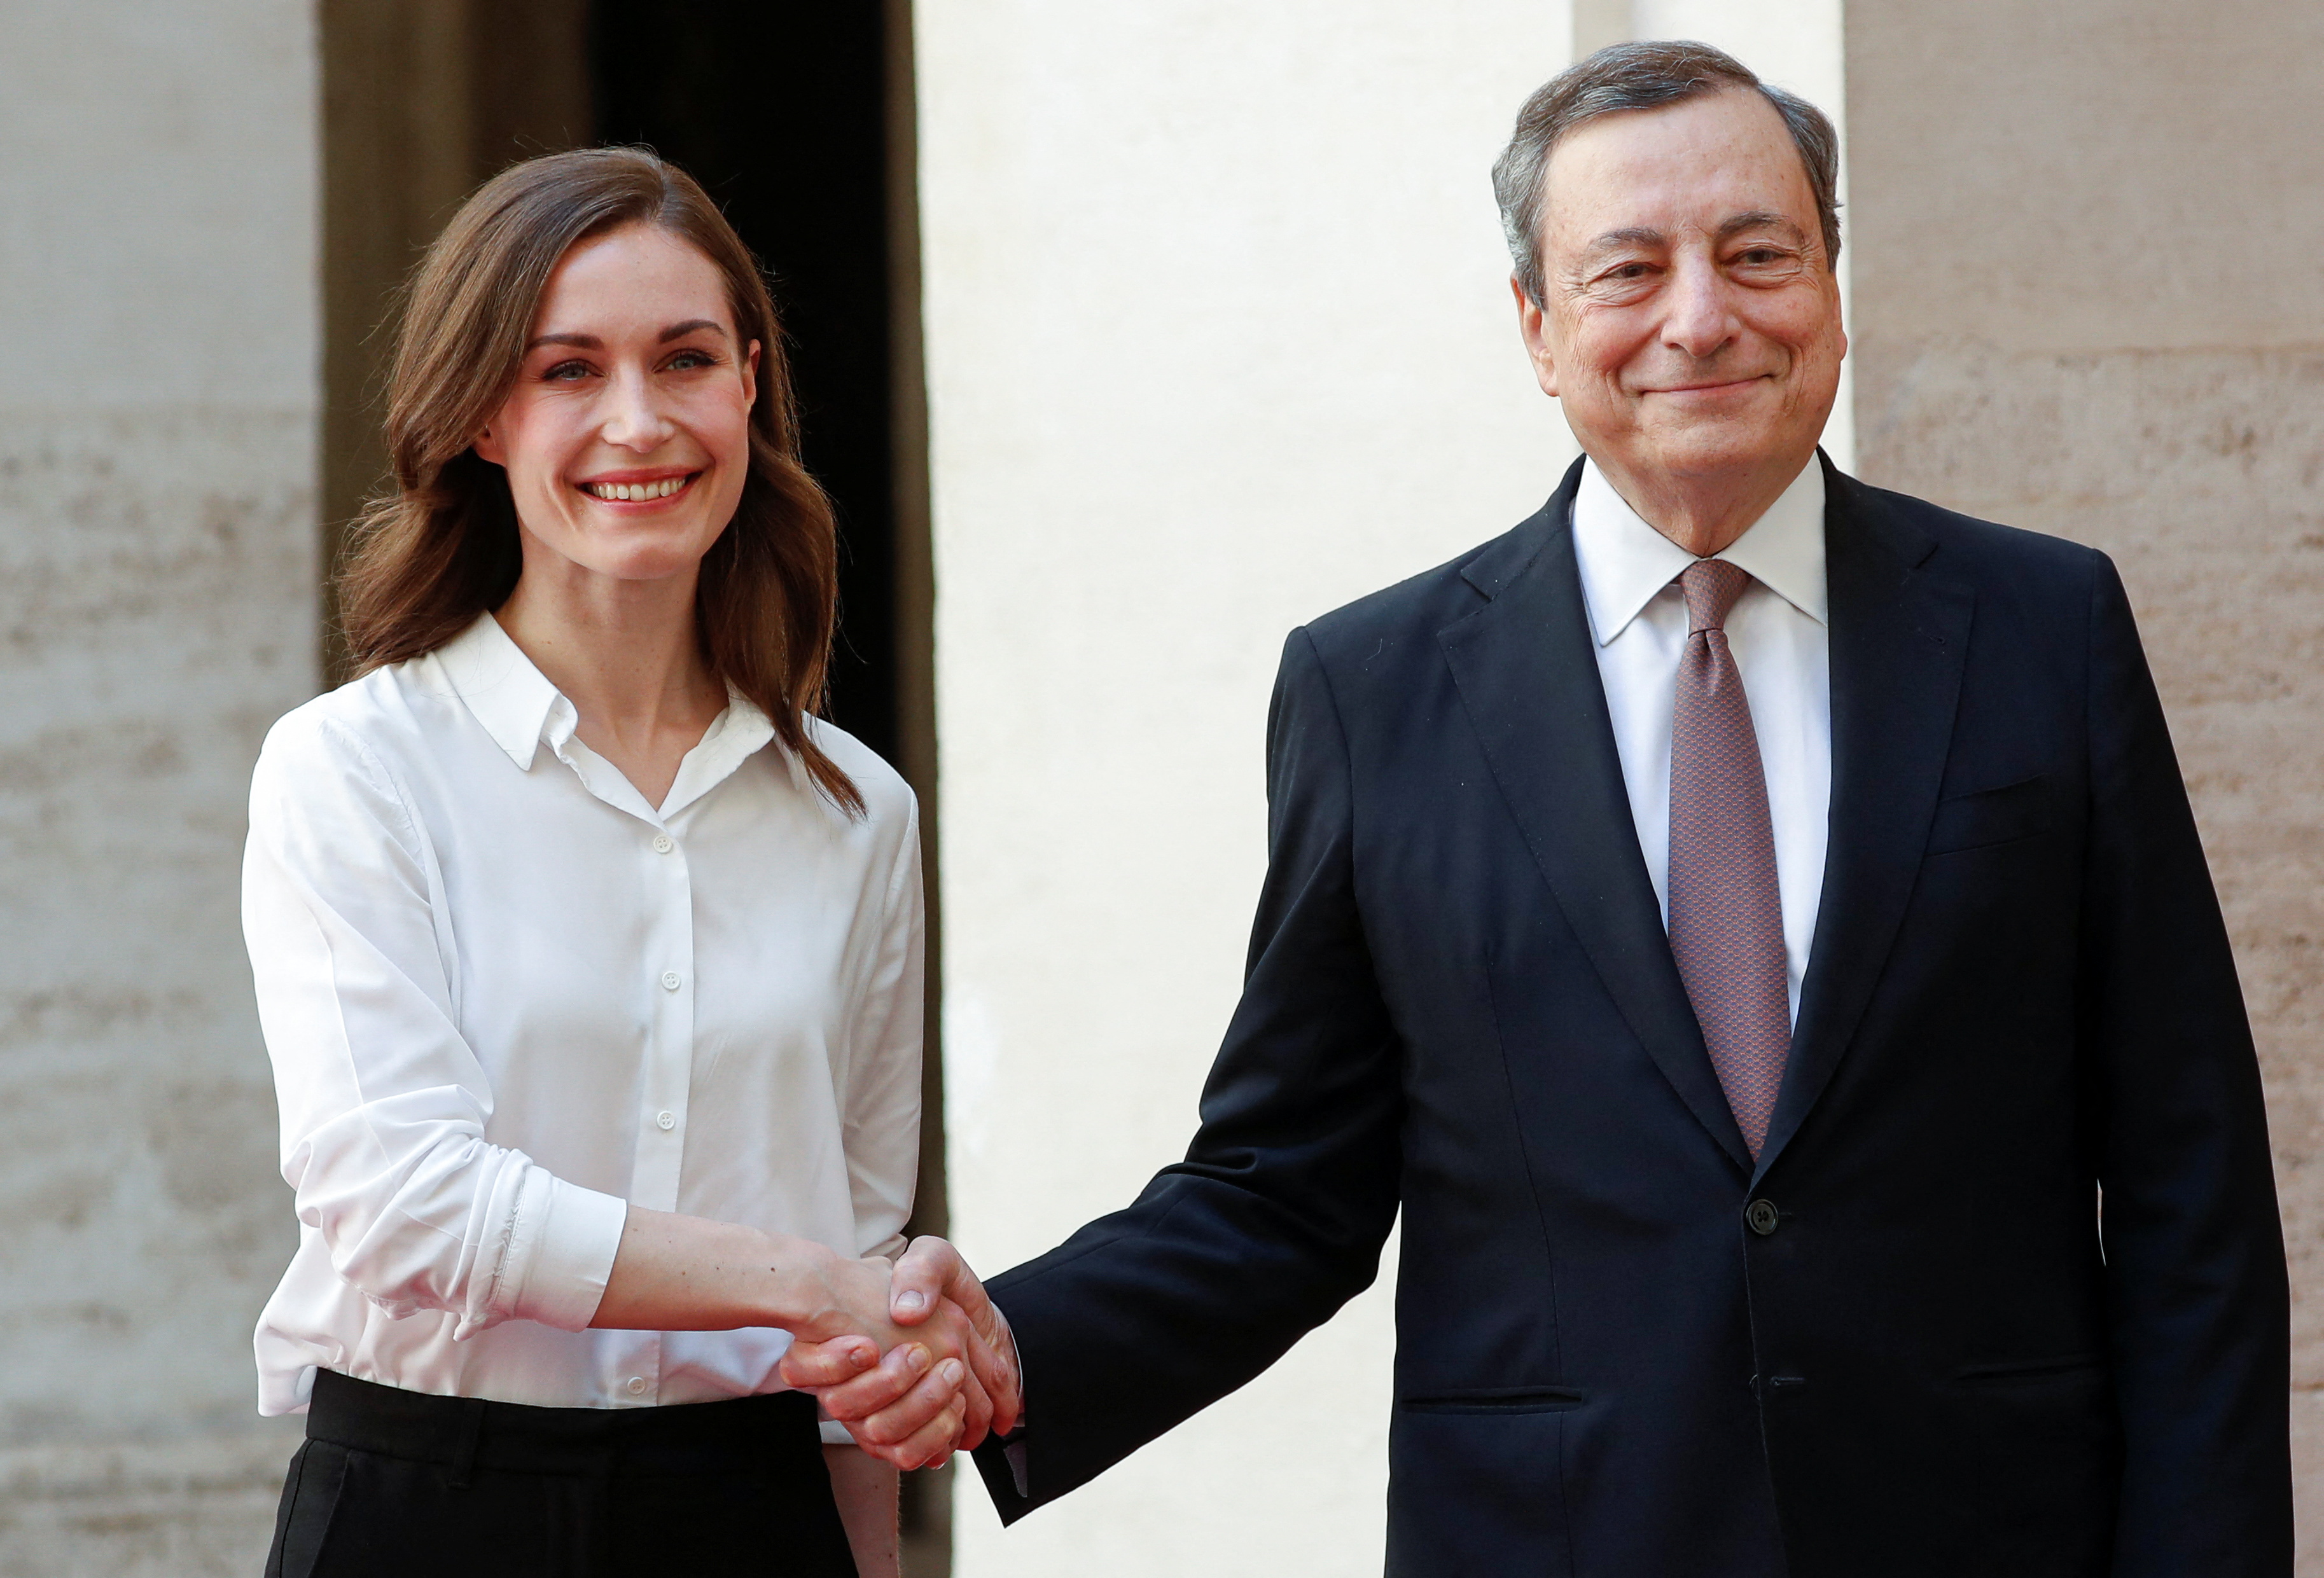 Italian Prime Minister Draghi meets Finnish Prime Minister Marin in Rome